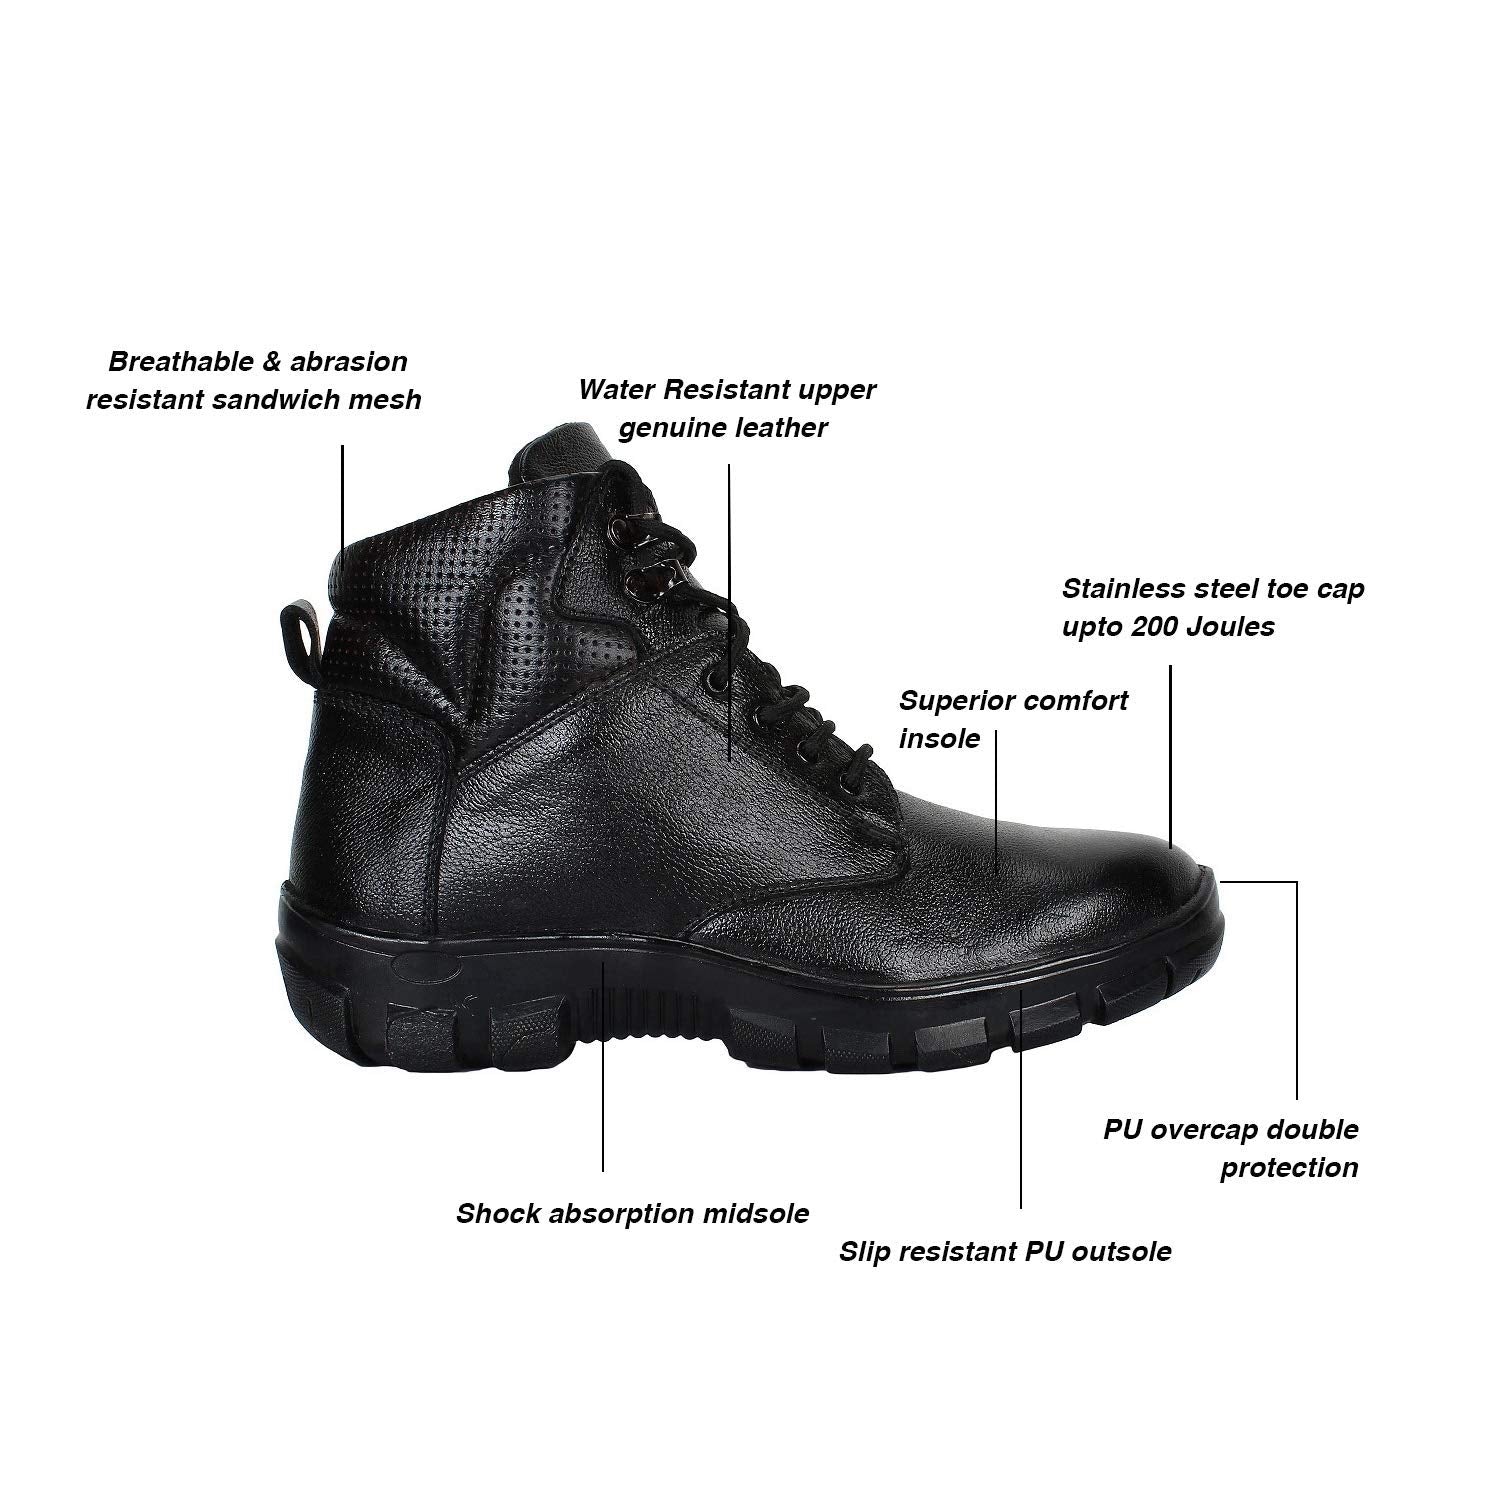 Aegon Tusker Black Industrial Water Resistant Safety Shoes for Men with Steel Toe